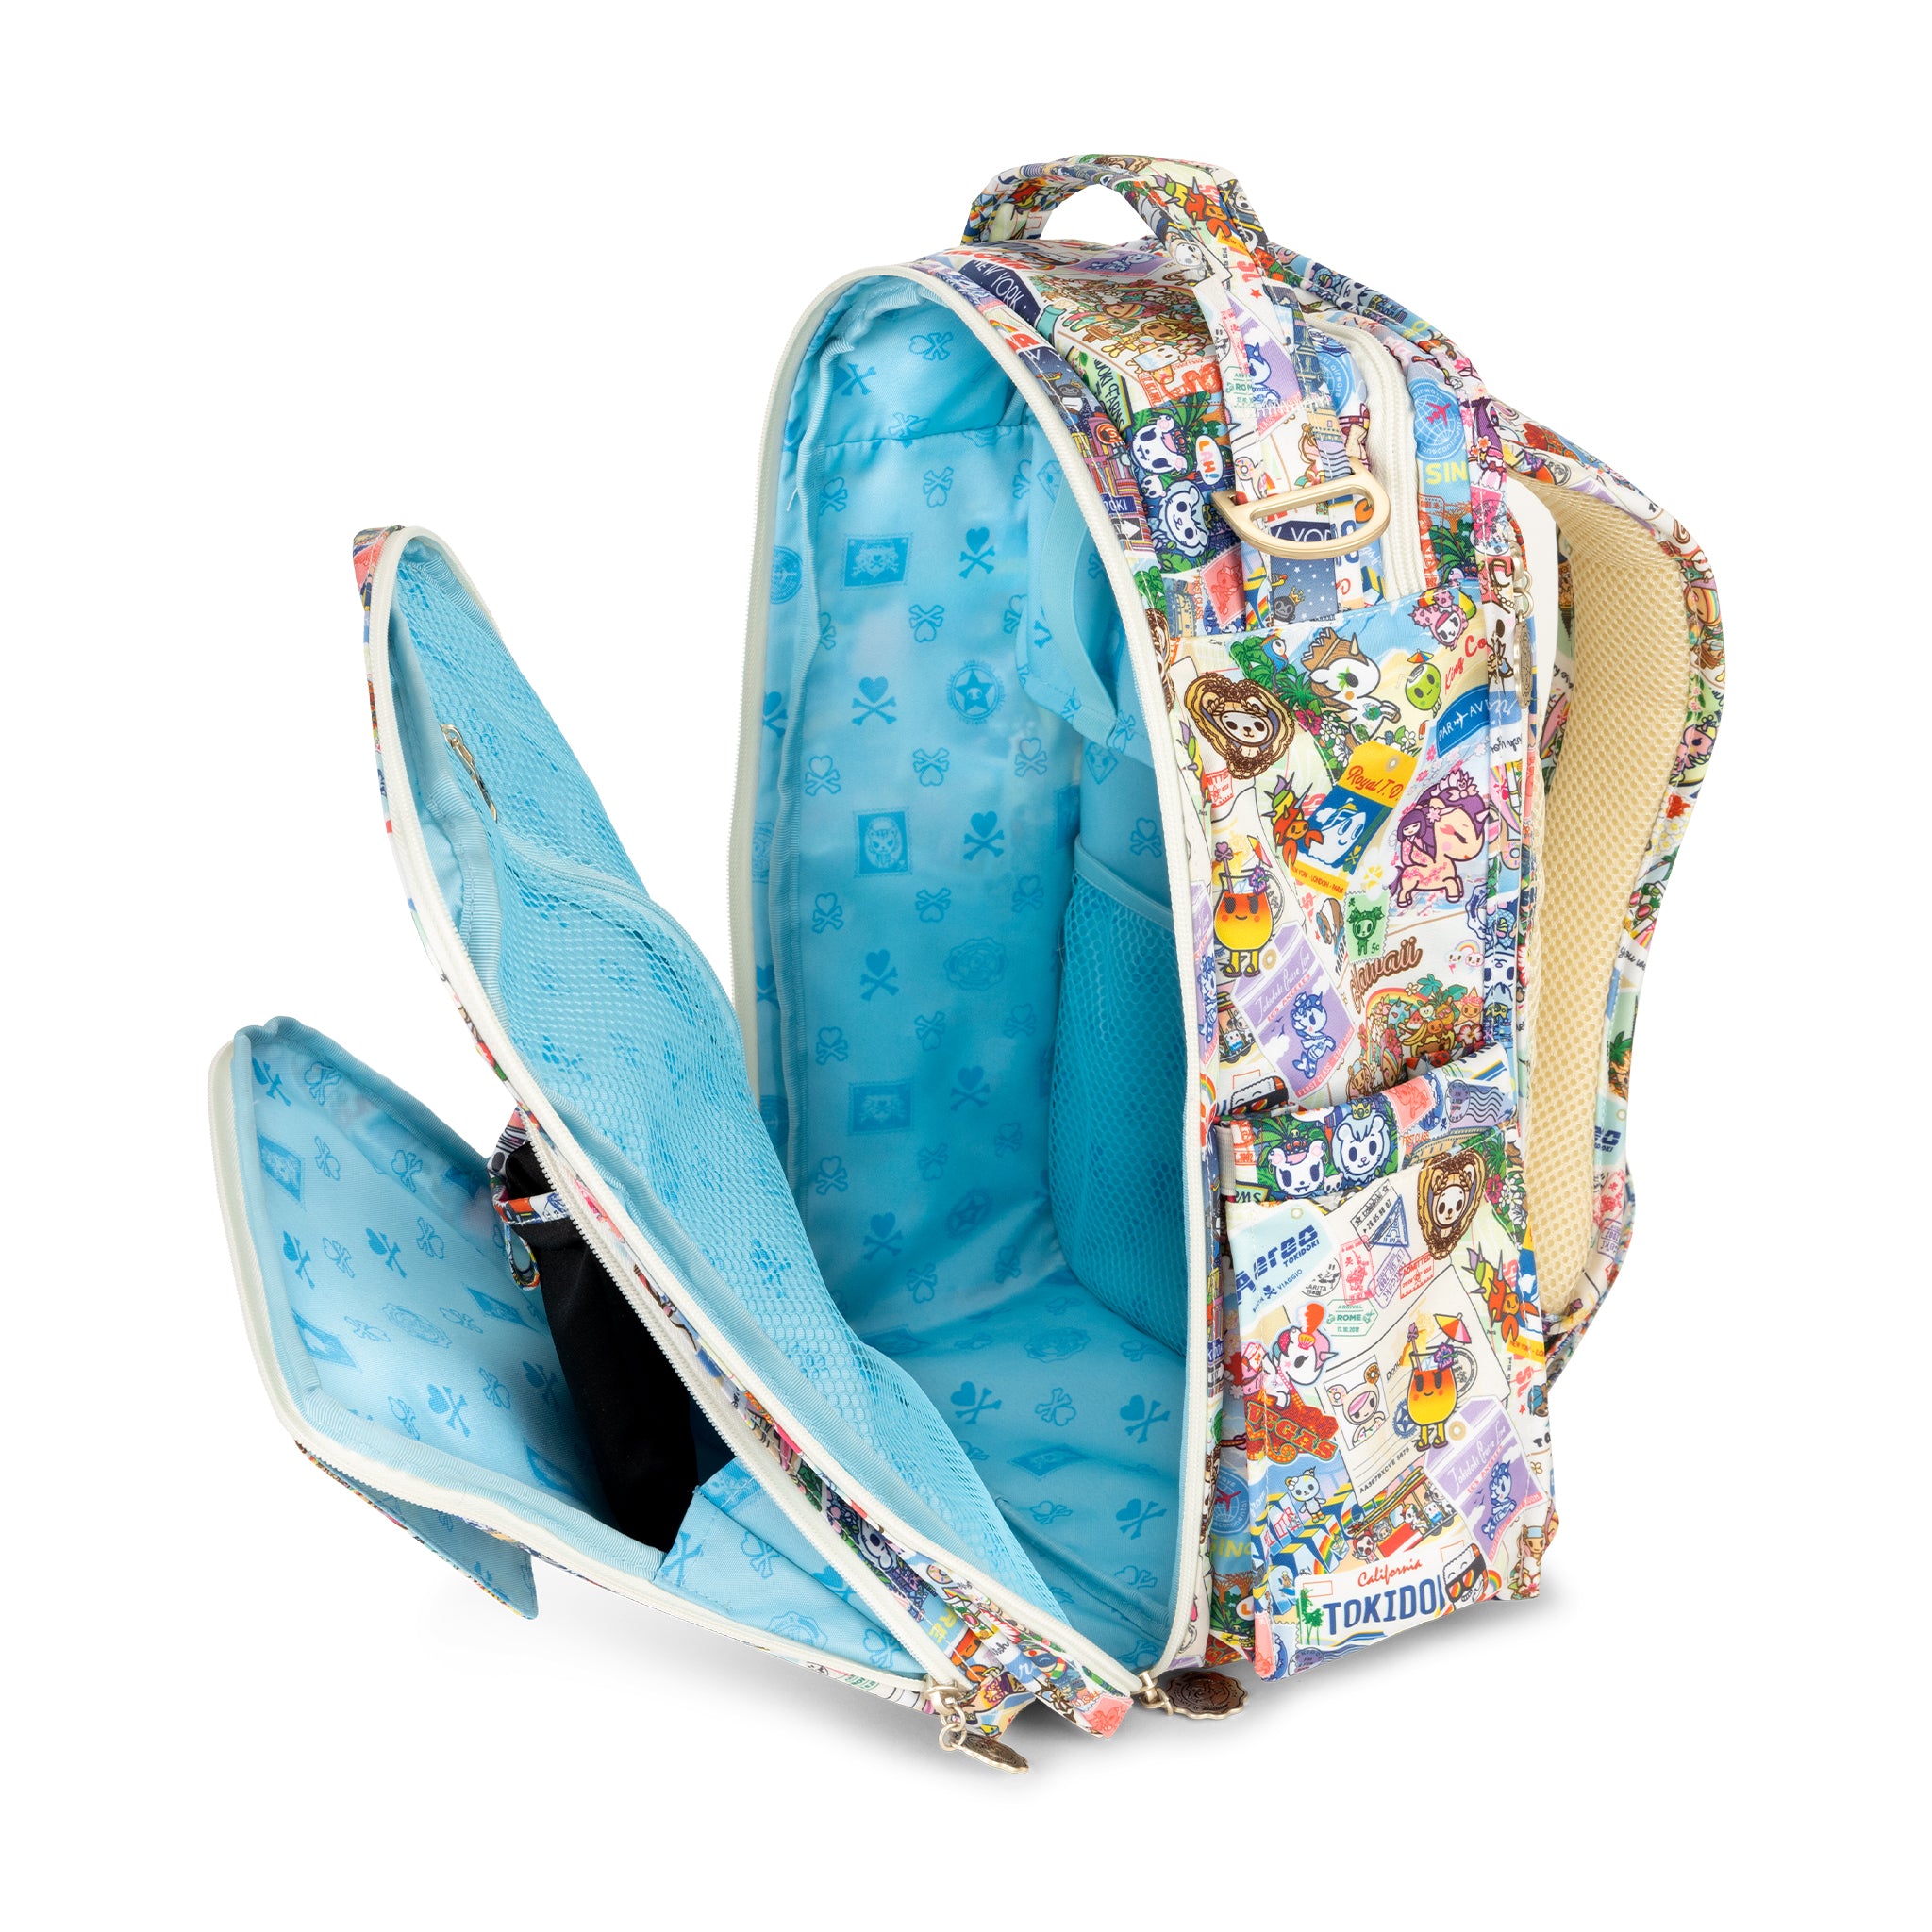 Multicolor Postcards with tokidoki characters traveling Be Right Back Diaper Backpack Interior View